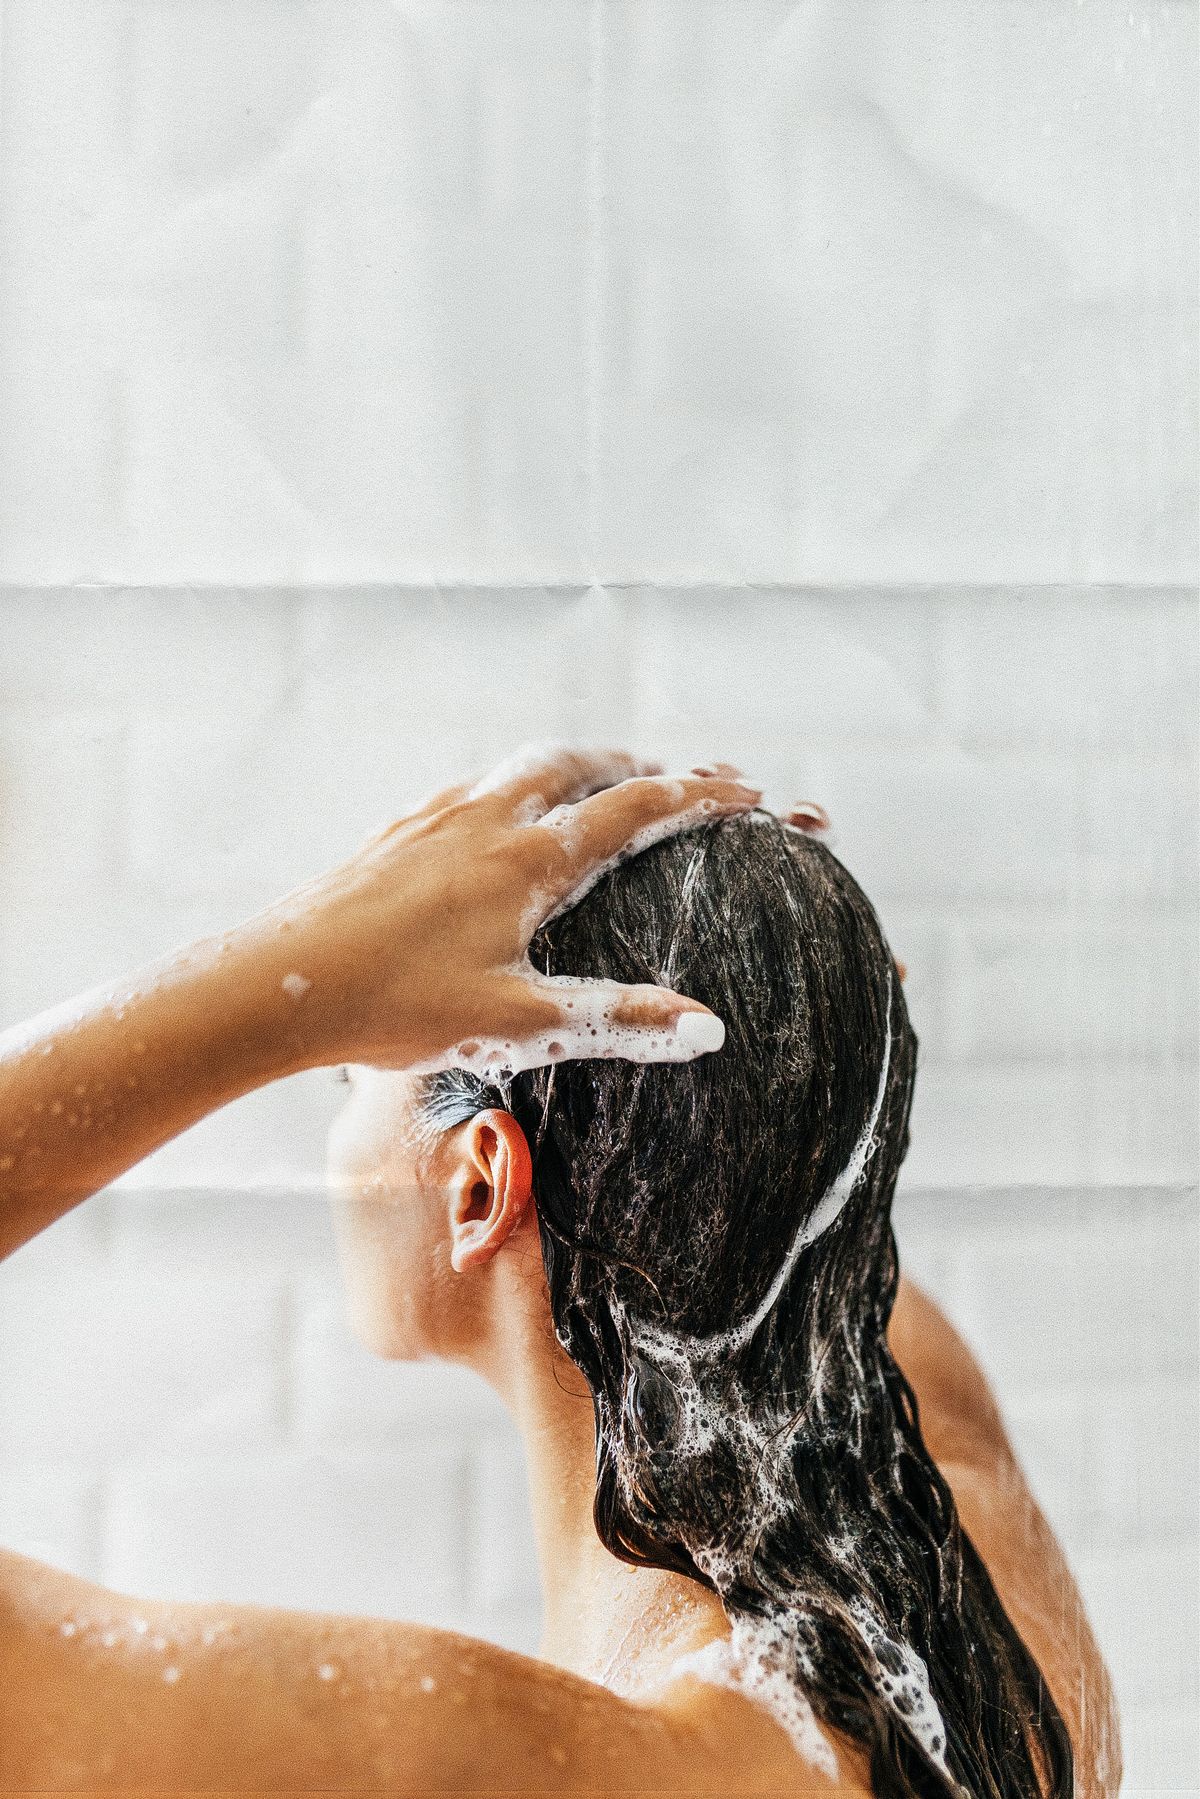 Why Are Sulfates Bad for Hair? When to Use Sulfate Free Shampoo 2023